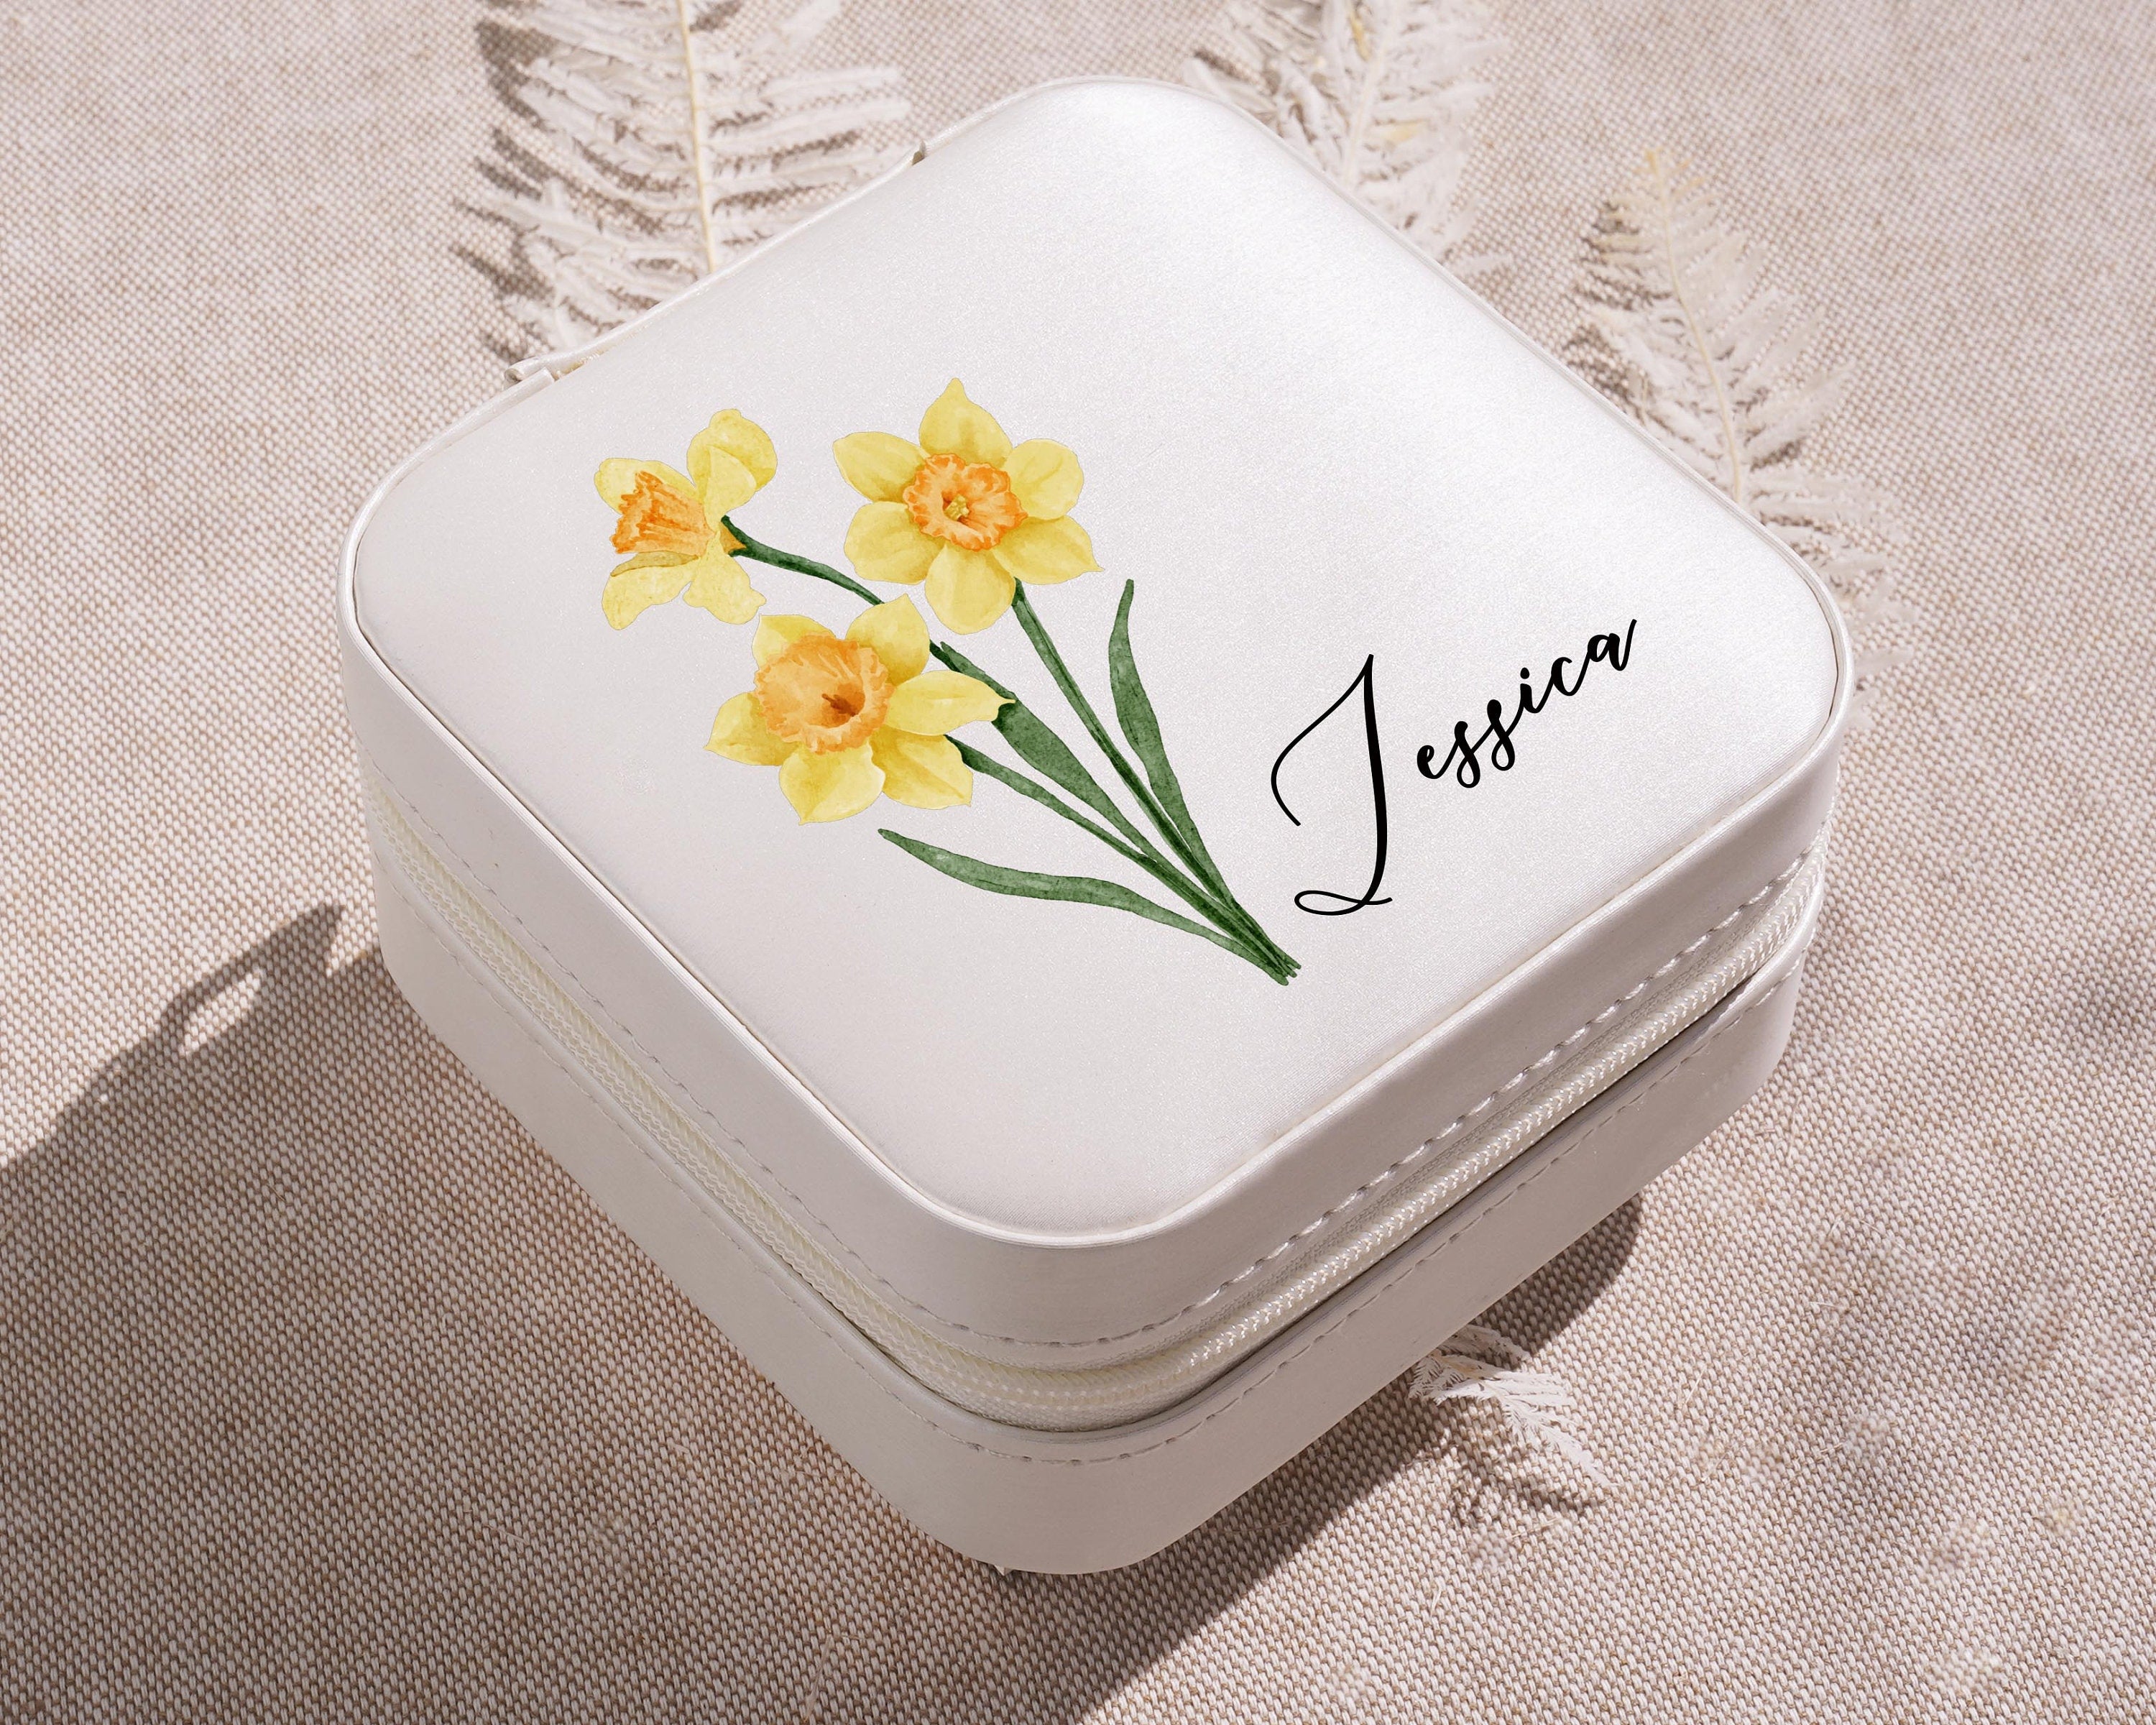 a white box with yellow flowers painted on it